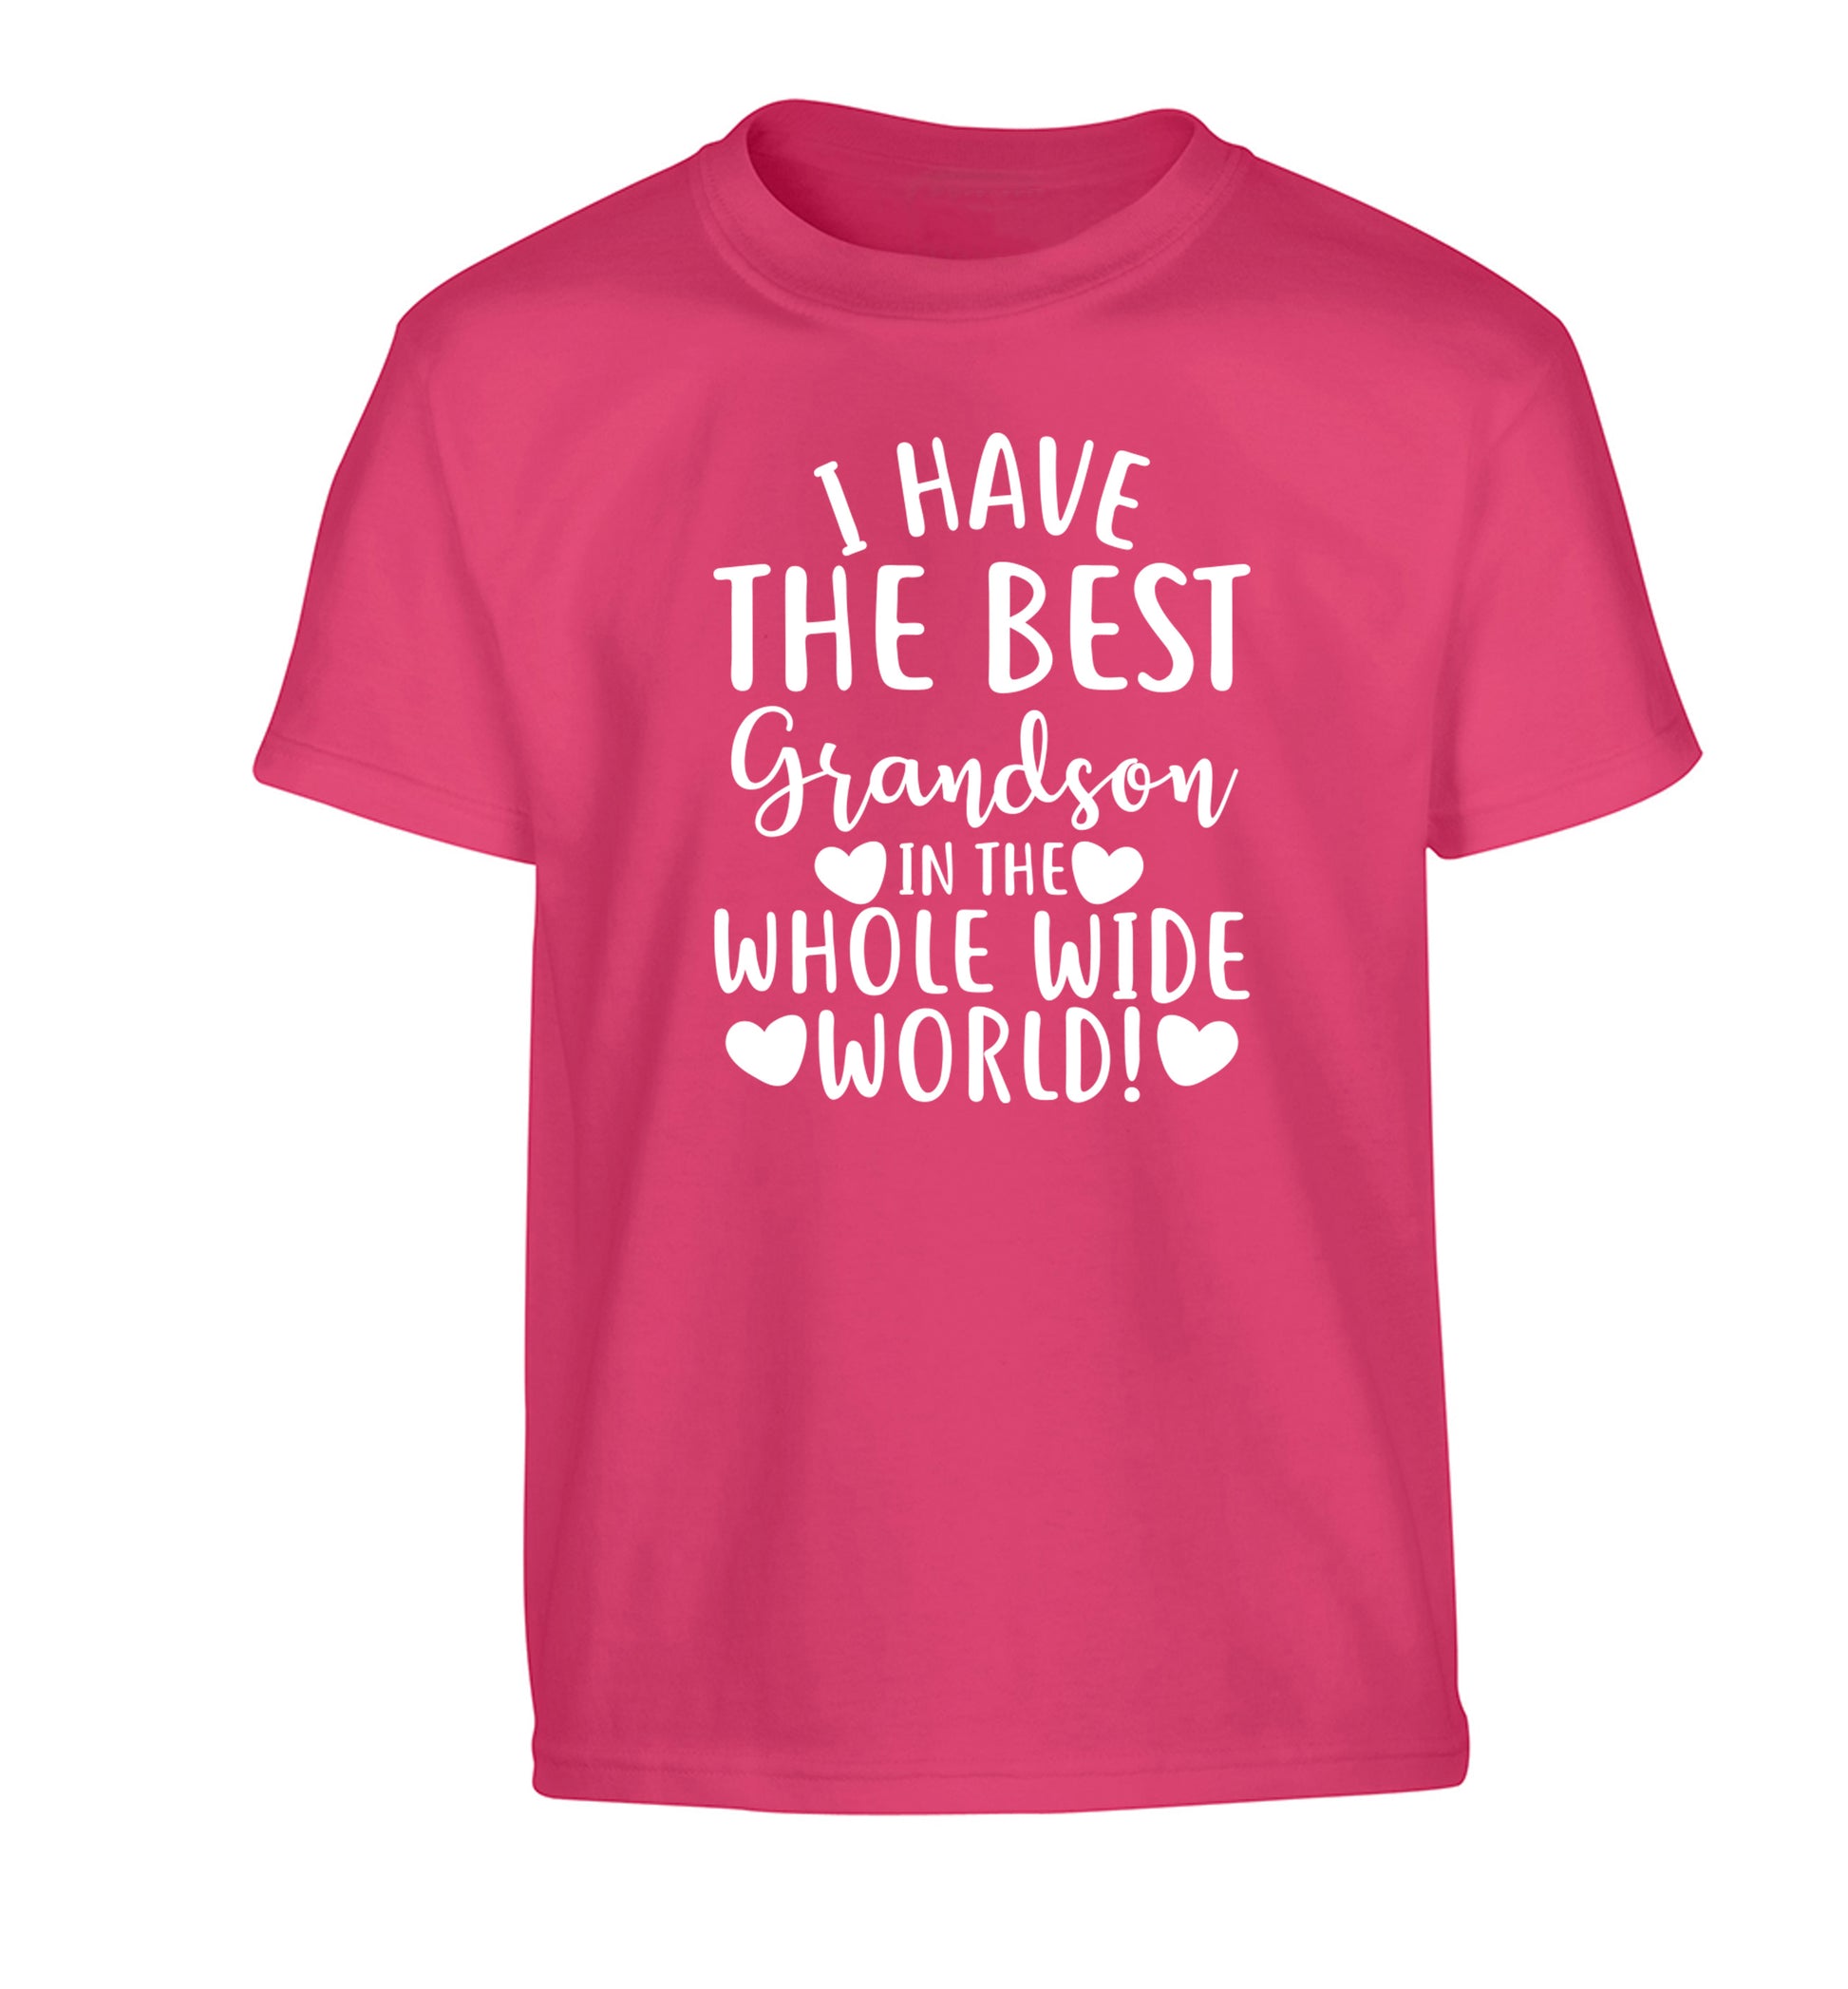 I have the best grandson in the whole wide world! Children's pink Tshirt 12-13 Years